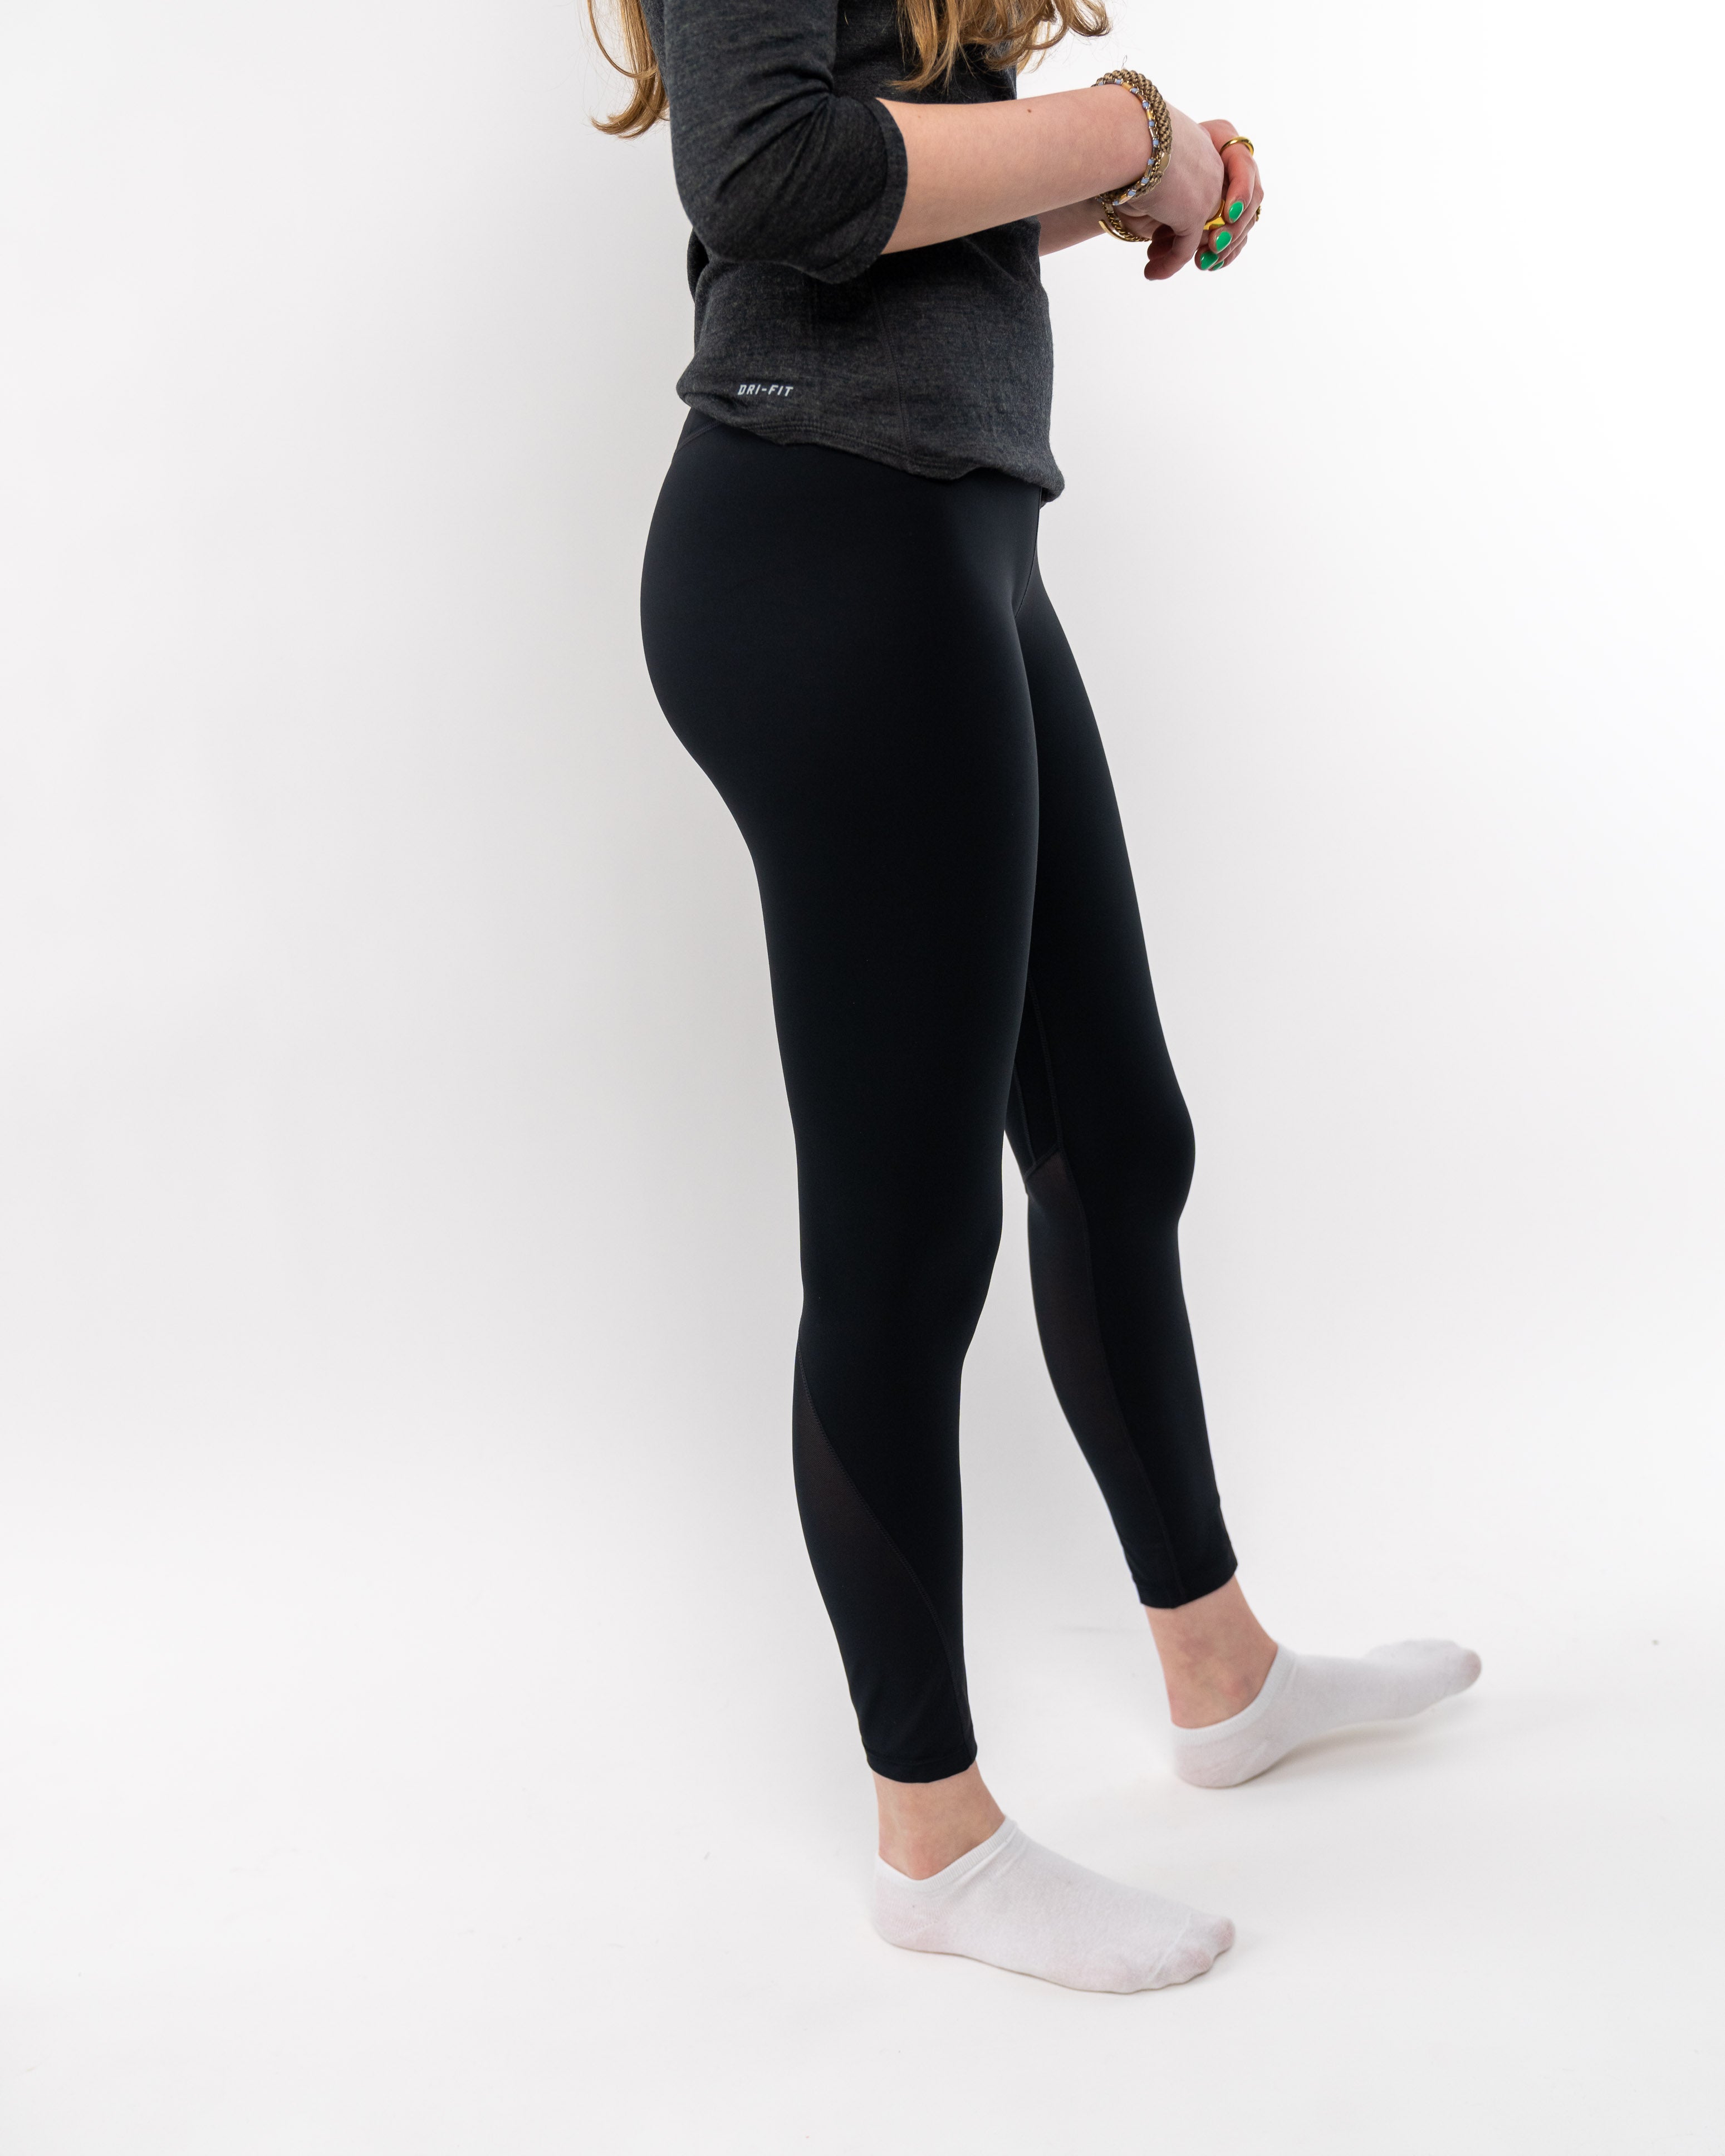 Nike One Mid-Rise 7/8 Tights